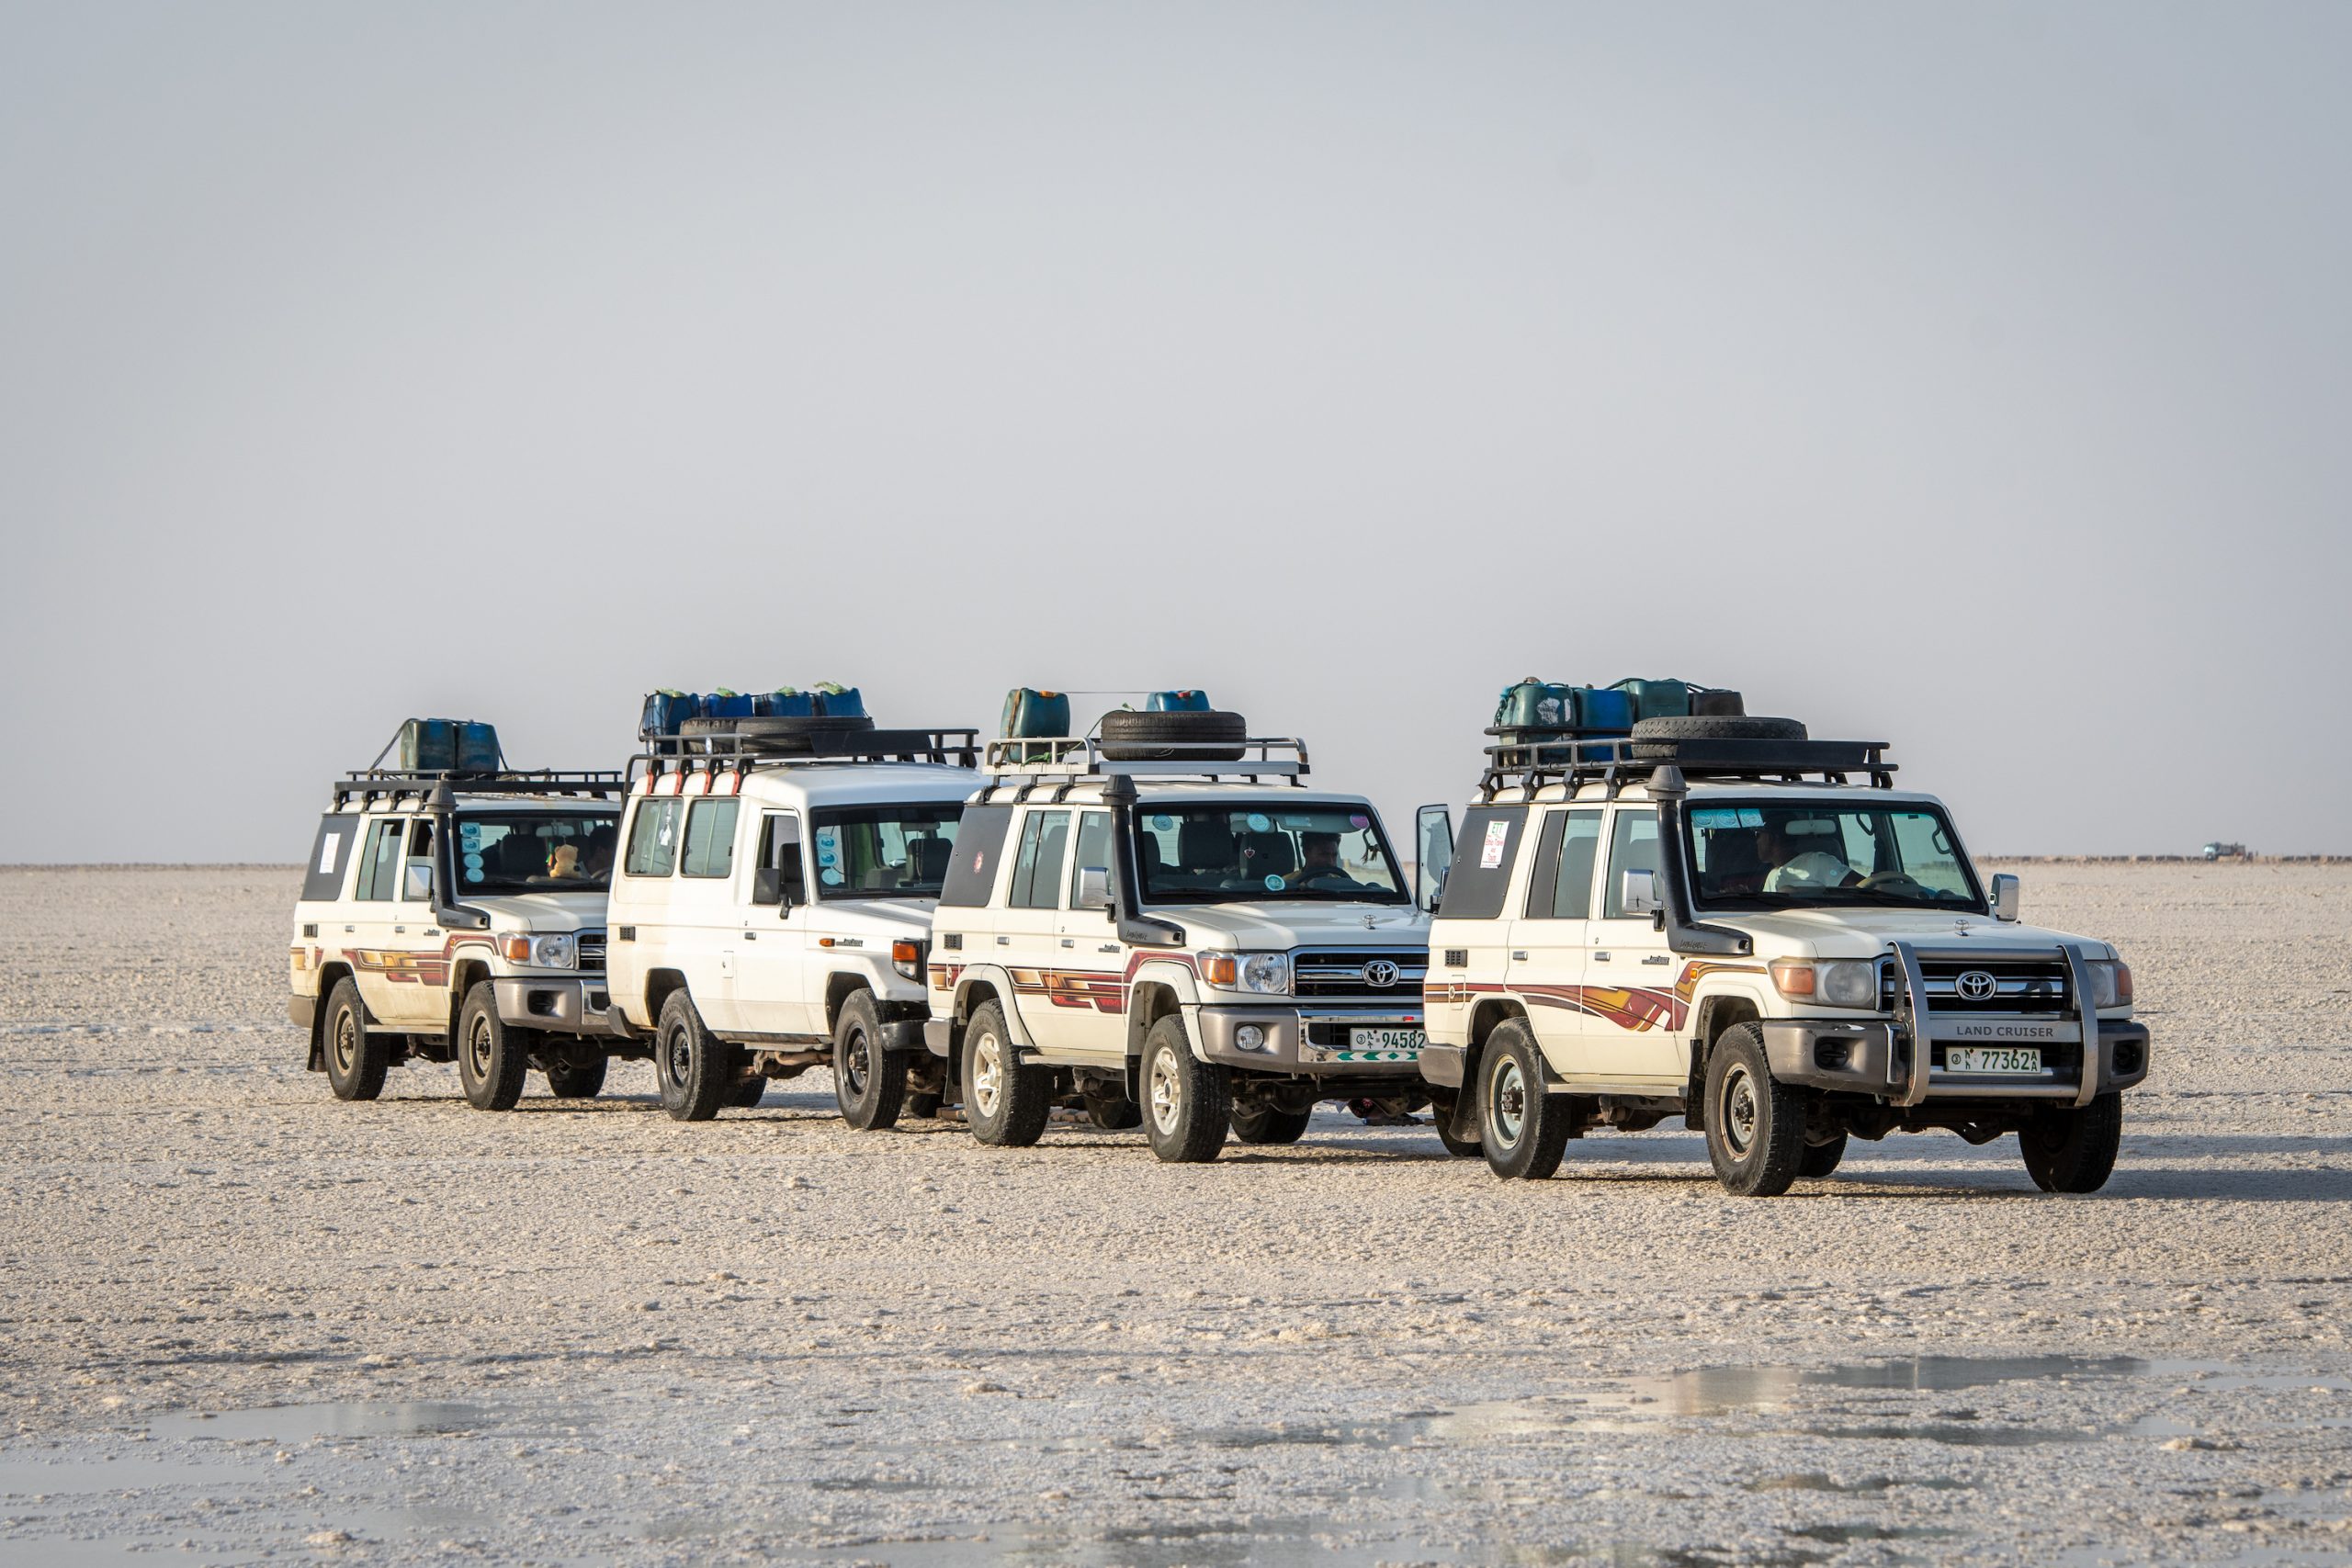 a troop of Land Cruiser J70 Toyota SUVs in that salt flats of Ethiopia.